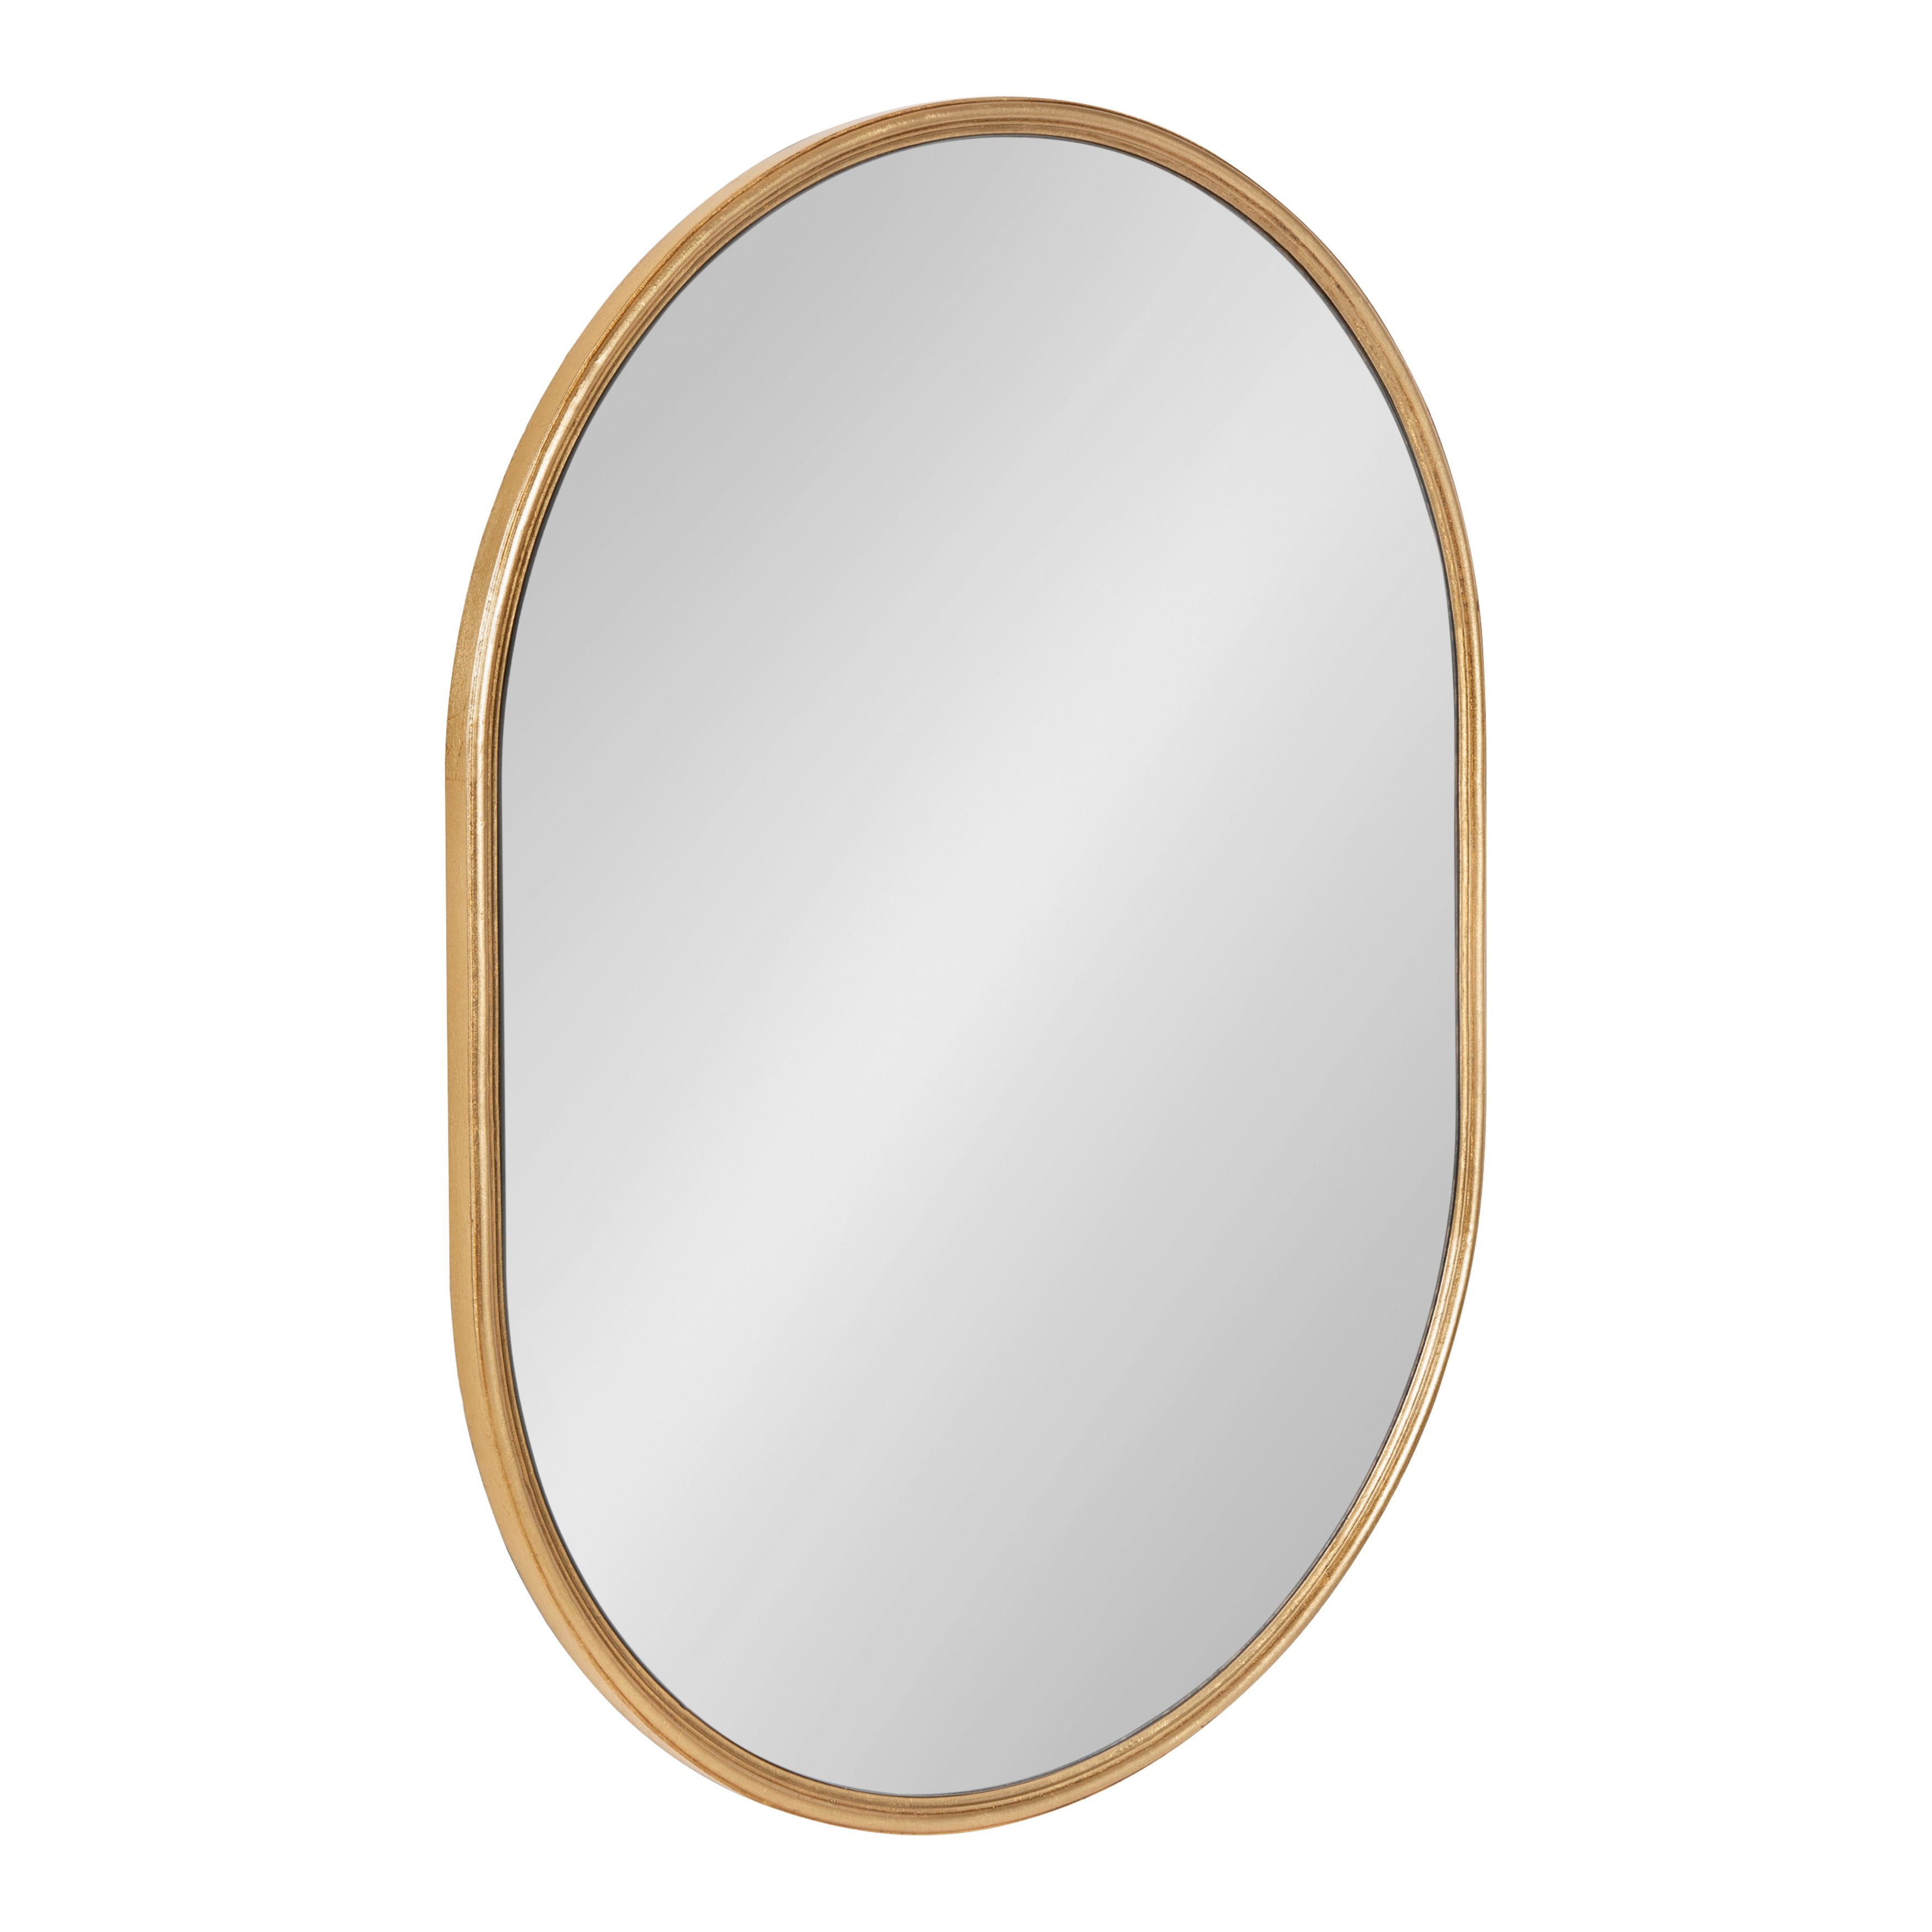 Kate And Laurel Caskill Mid Century Oval Mirror 18 X 24 Gold Capsule Shaped Accent Mirror For Entryway Living Room Or Bathroom Walmart Com Walmart Com